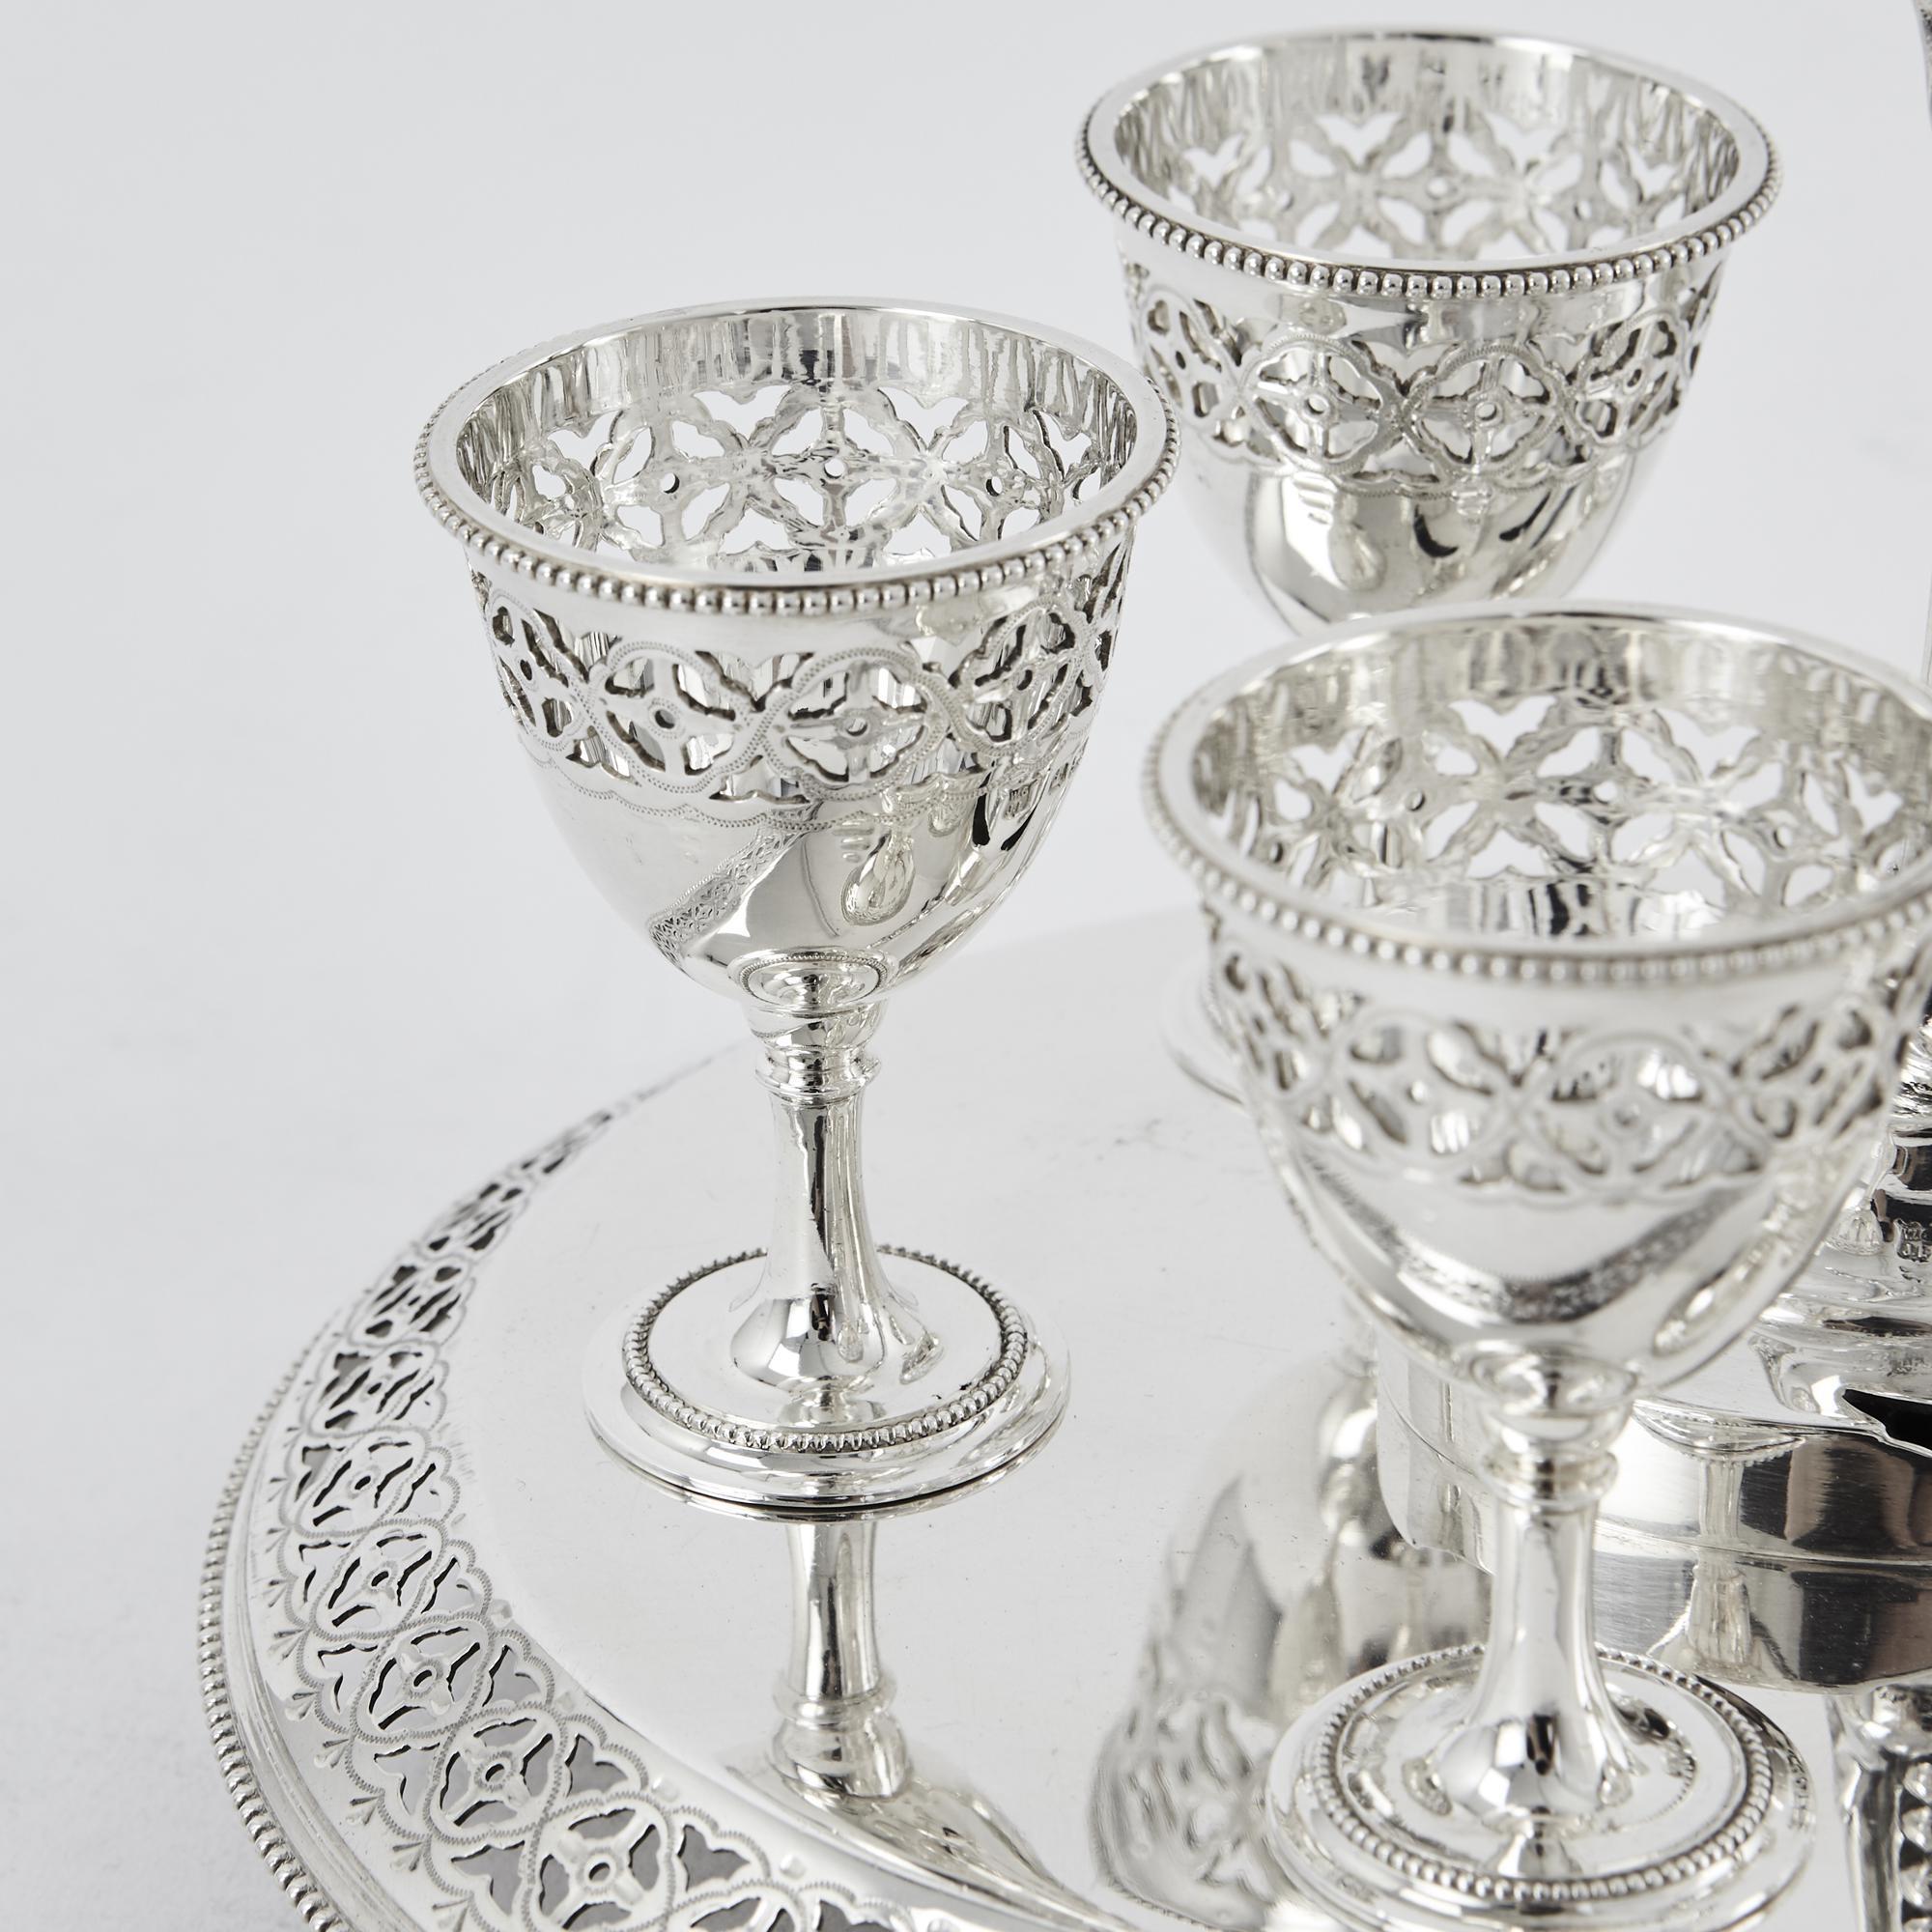 Pretty antique silver cruet frame with six original removable silver egg cups; each held in its place by a silver peg on the base. All pieces are crisply pierced and engraved with delicate bead pattern borders. The frame and each cup are all